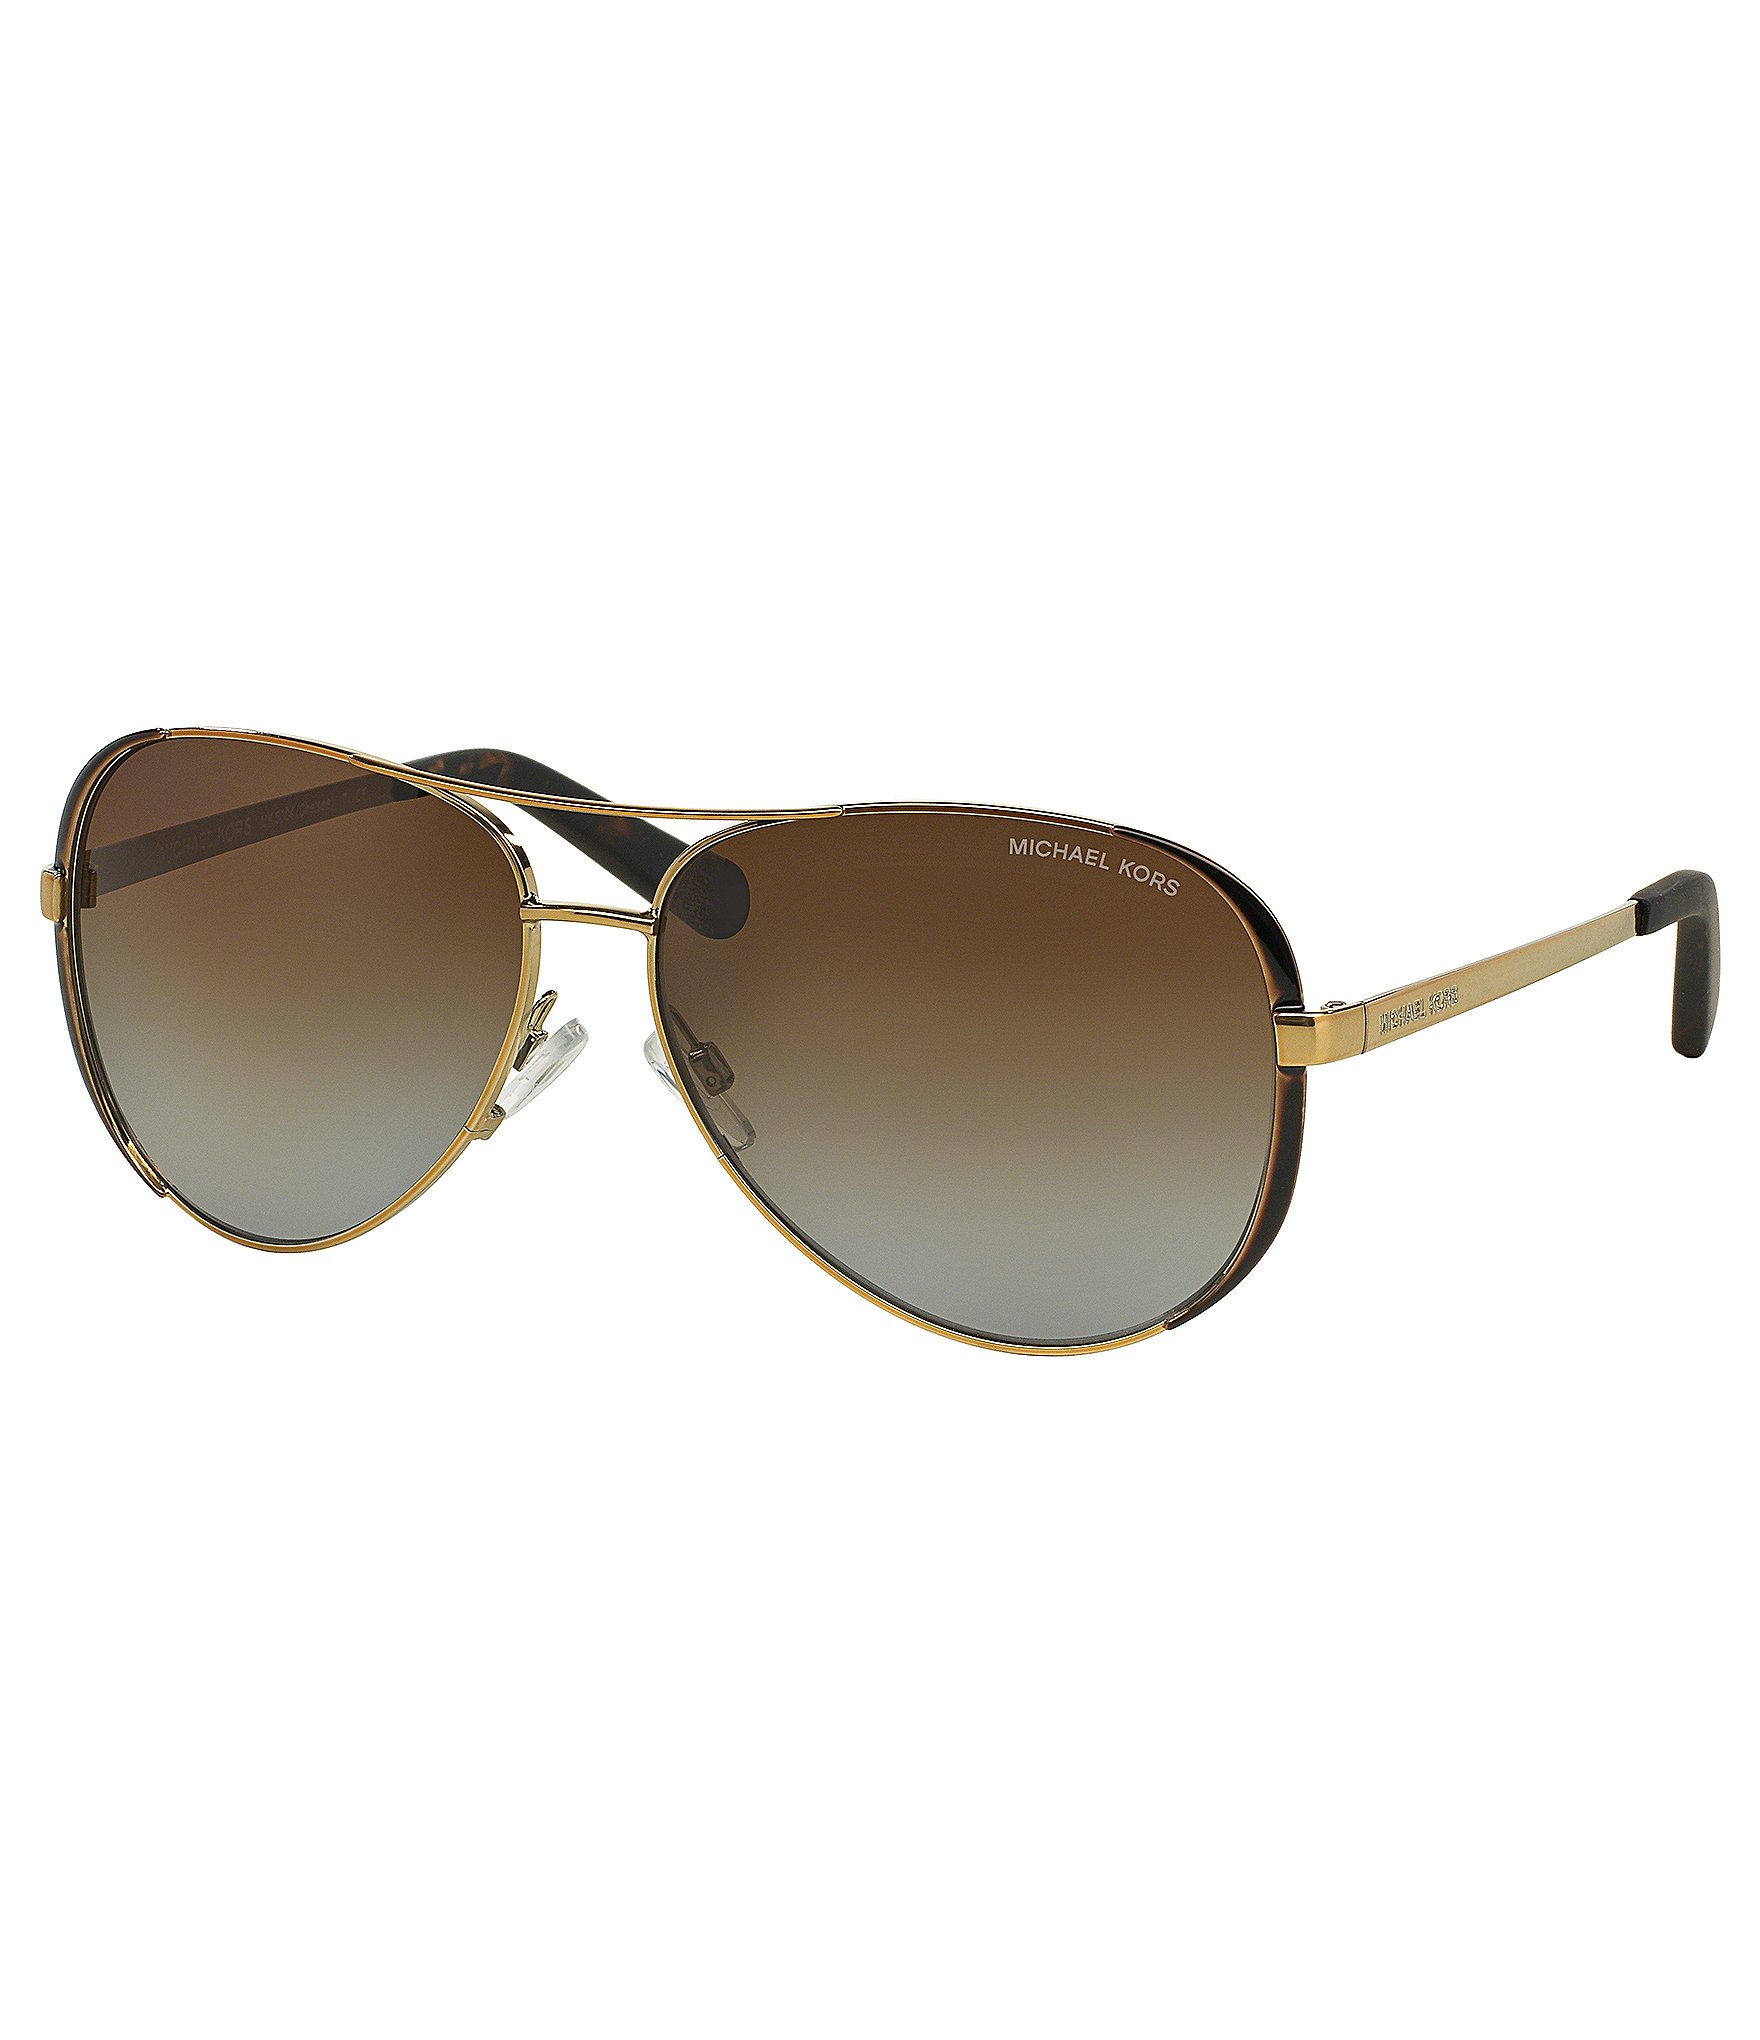 Buy Michael Kors Sunglasses  Accessories Online  THE ICONIC